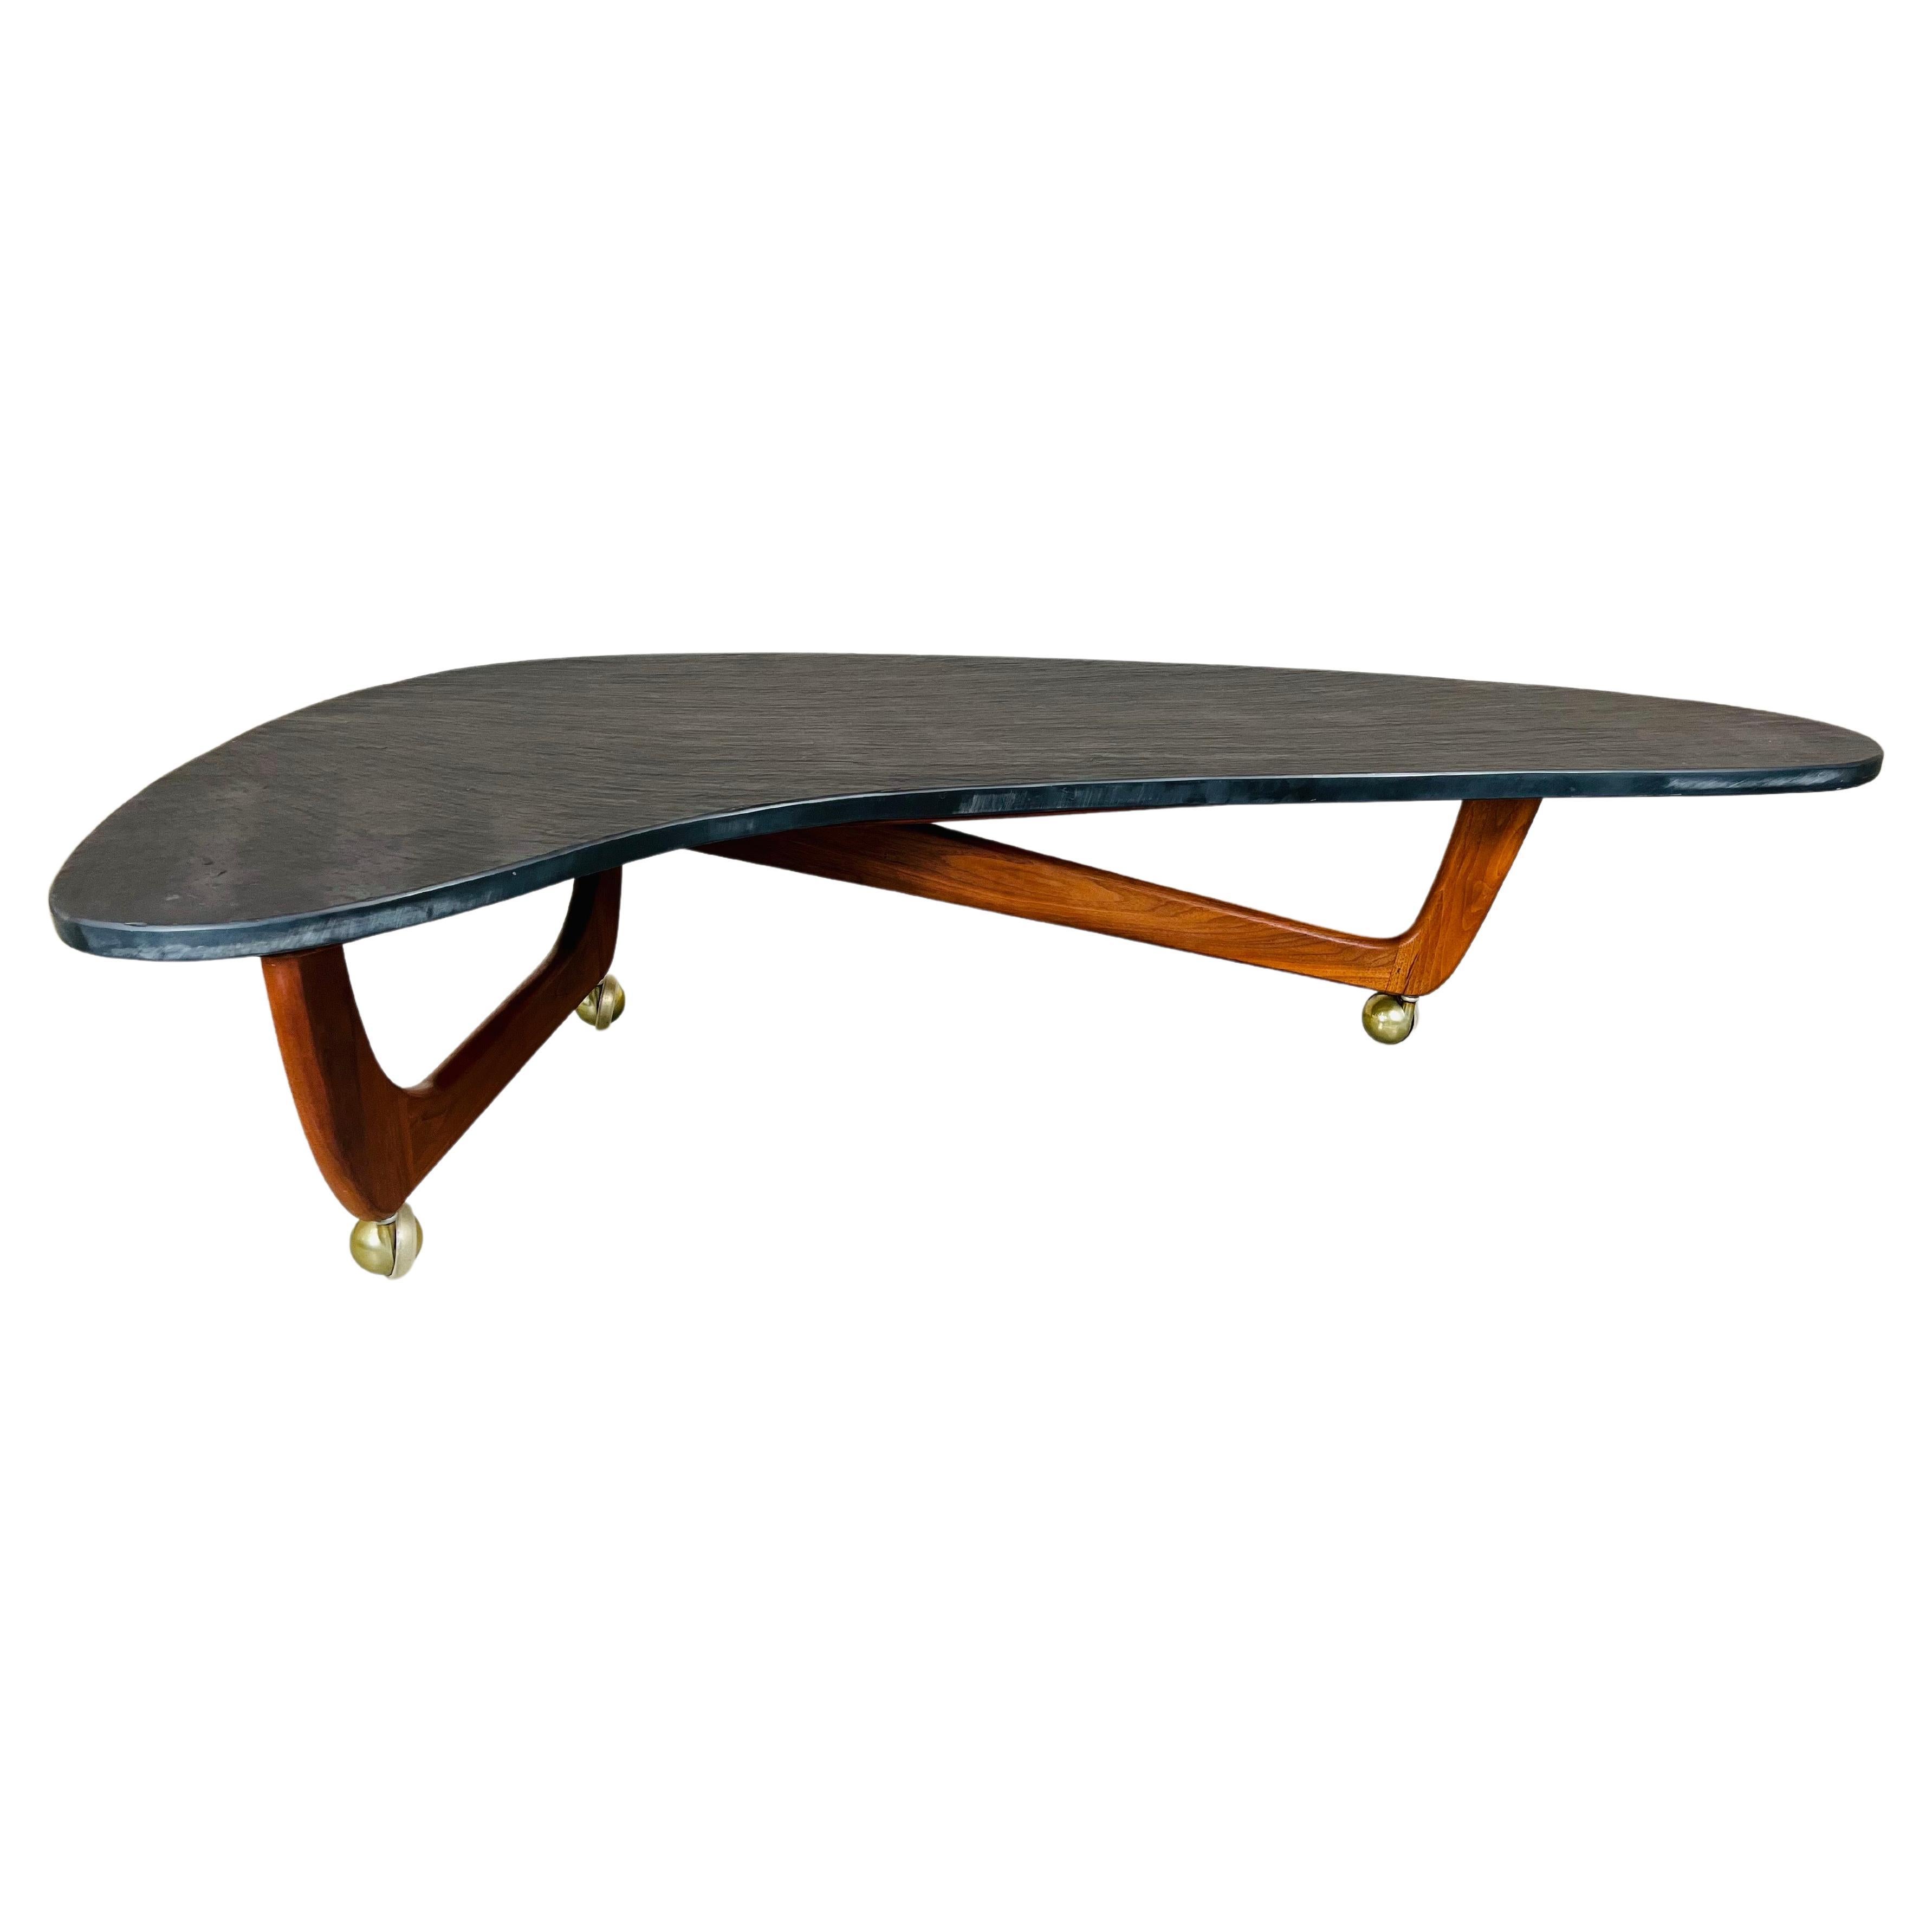 Adrian Pearsall Slate Top & Walnut Biomorphic Boomerang Coffee or Cocktail Table